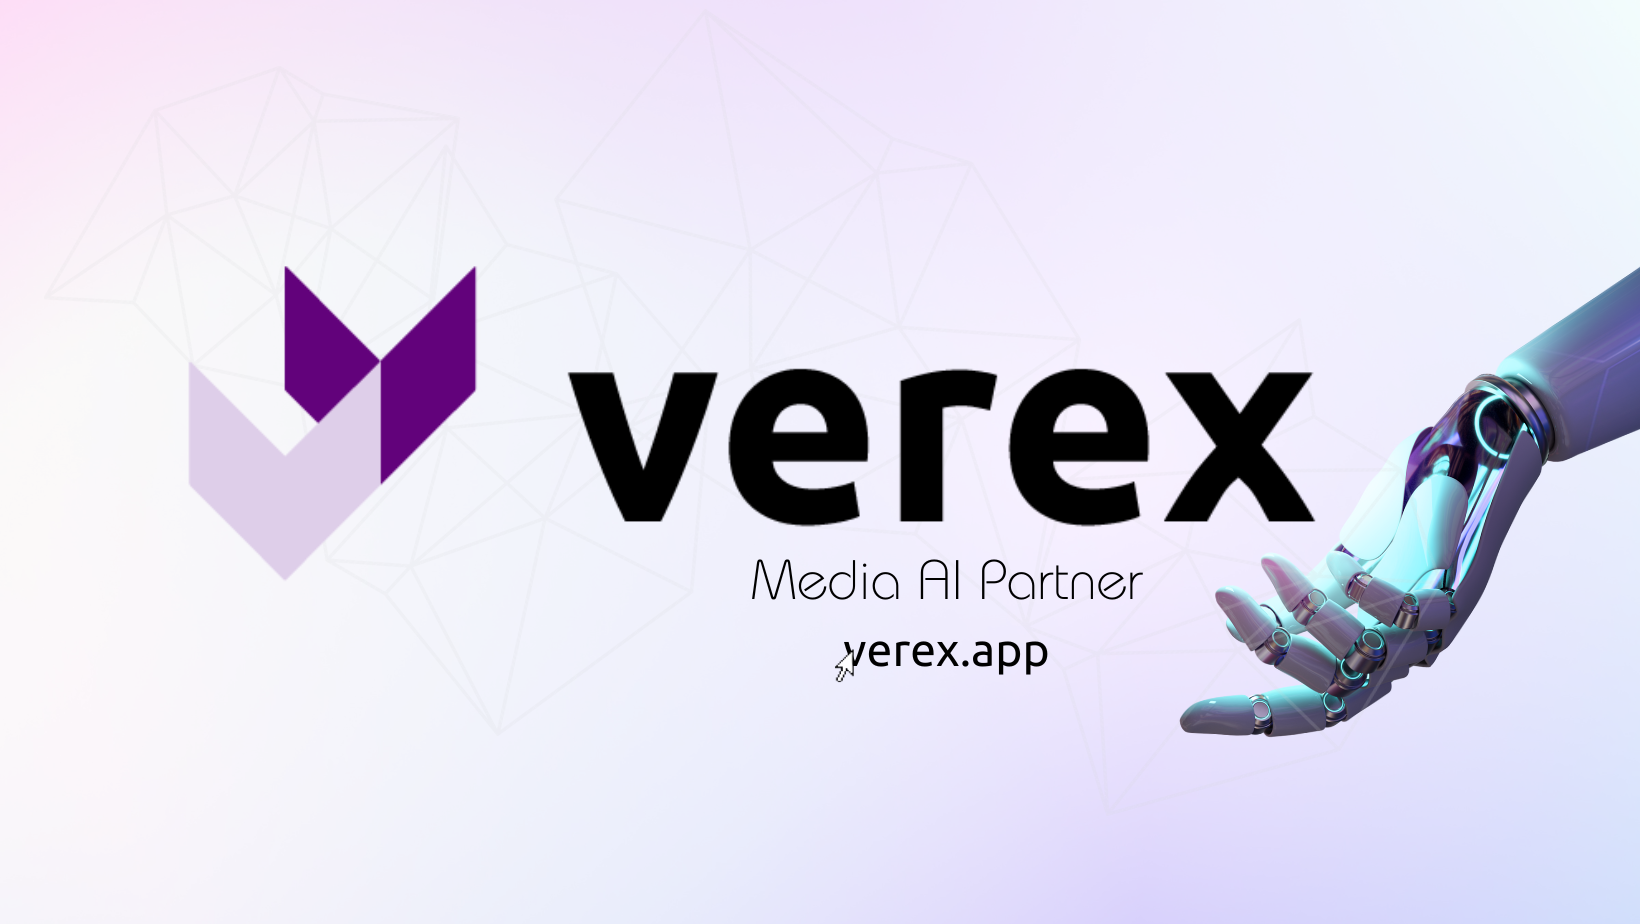 Combating Fake News and Boosting Creativity: The Verex Revolution